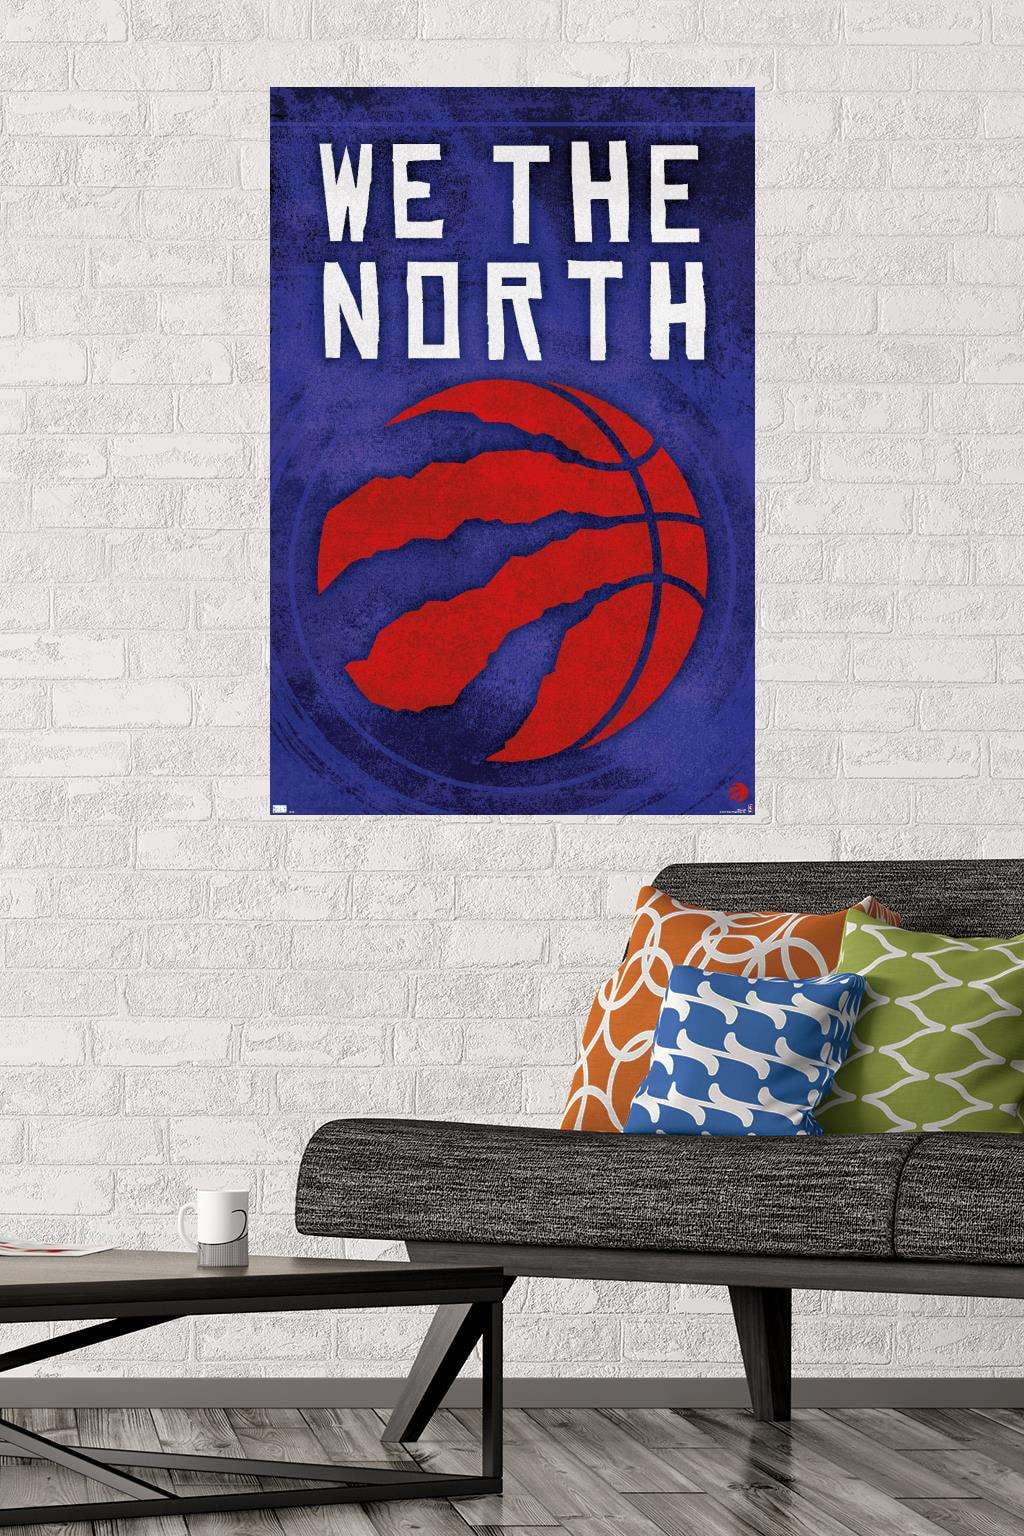 We The North wallpaper by CanuckRS - Download on ZEDGE™ | e5ca